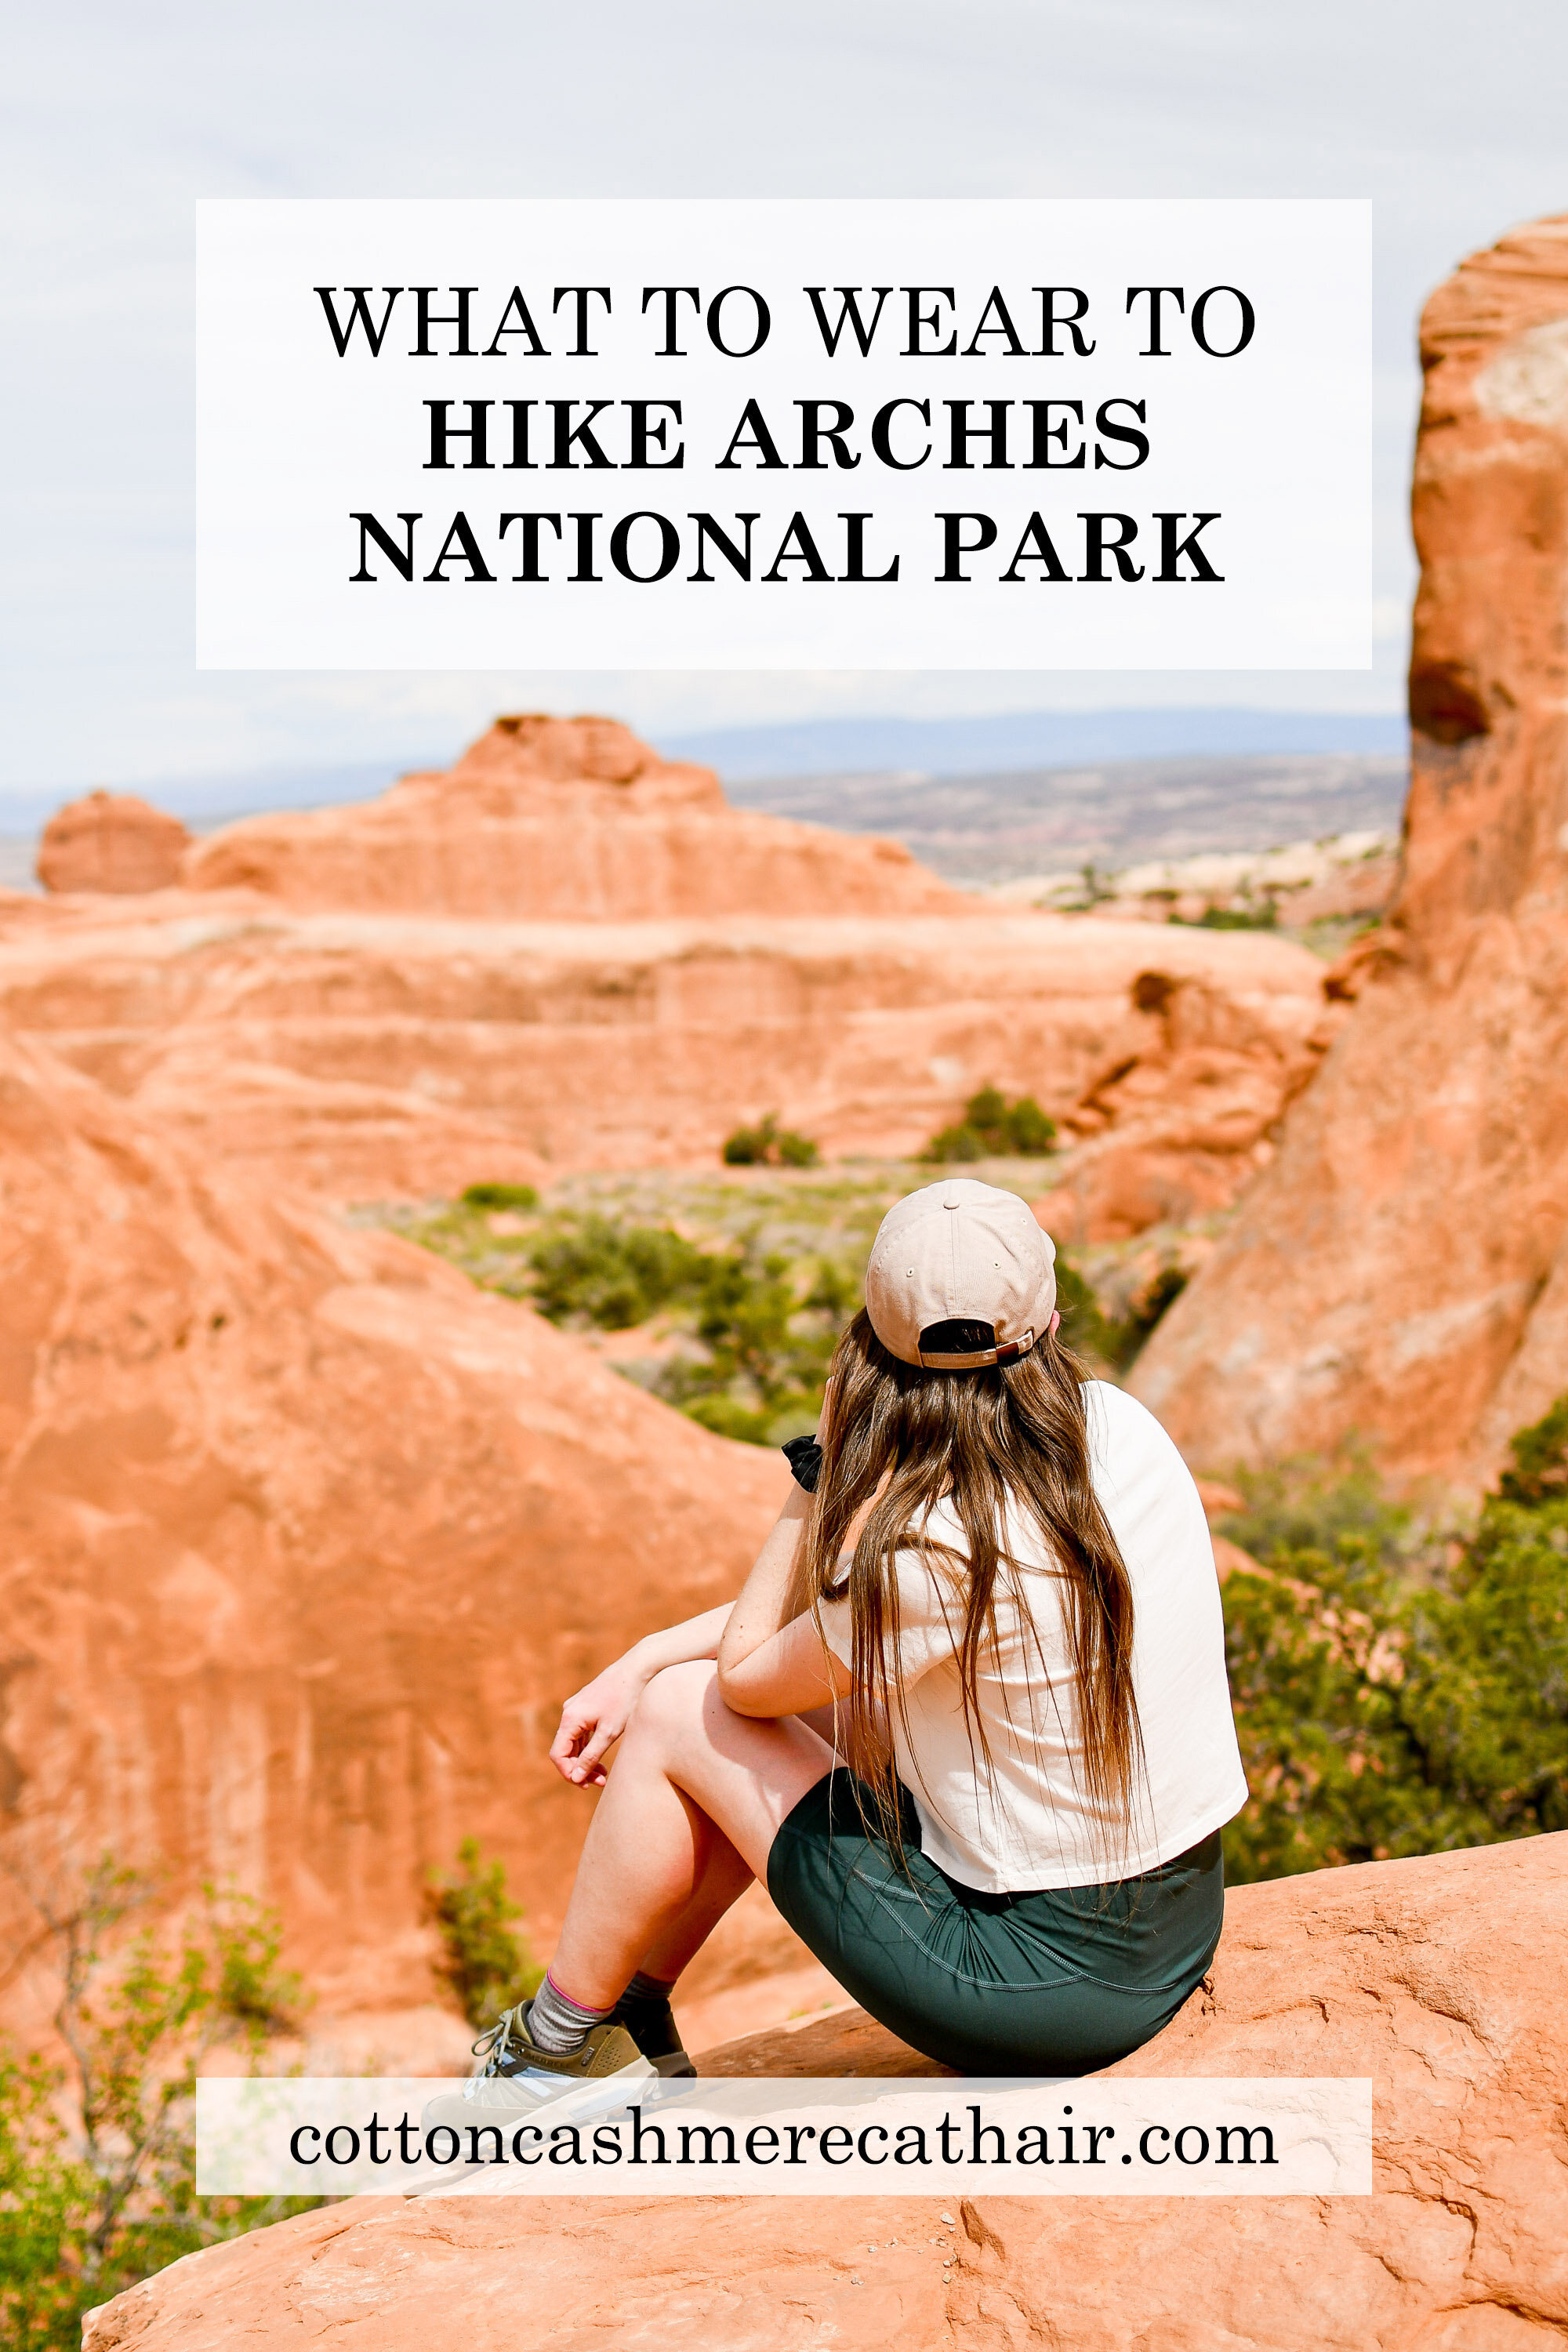 What to wear to hike Arches National Park